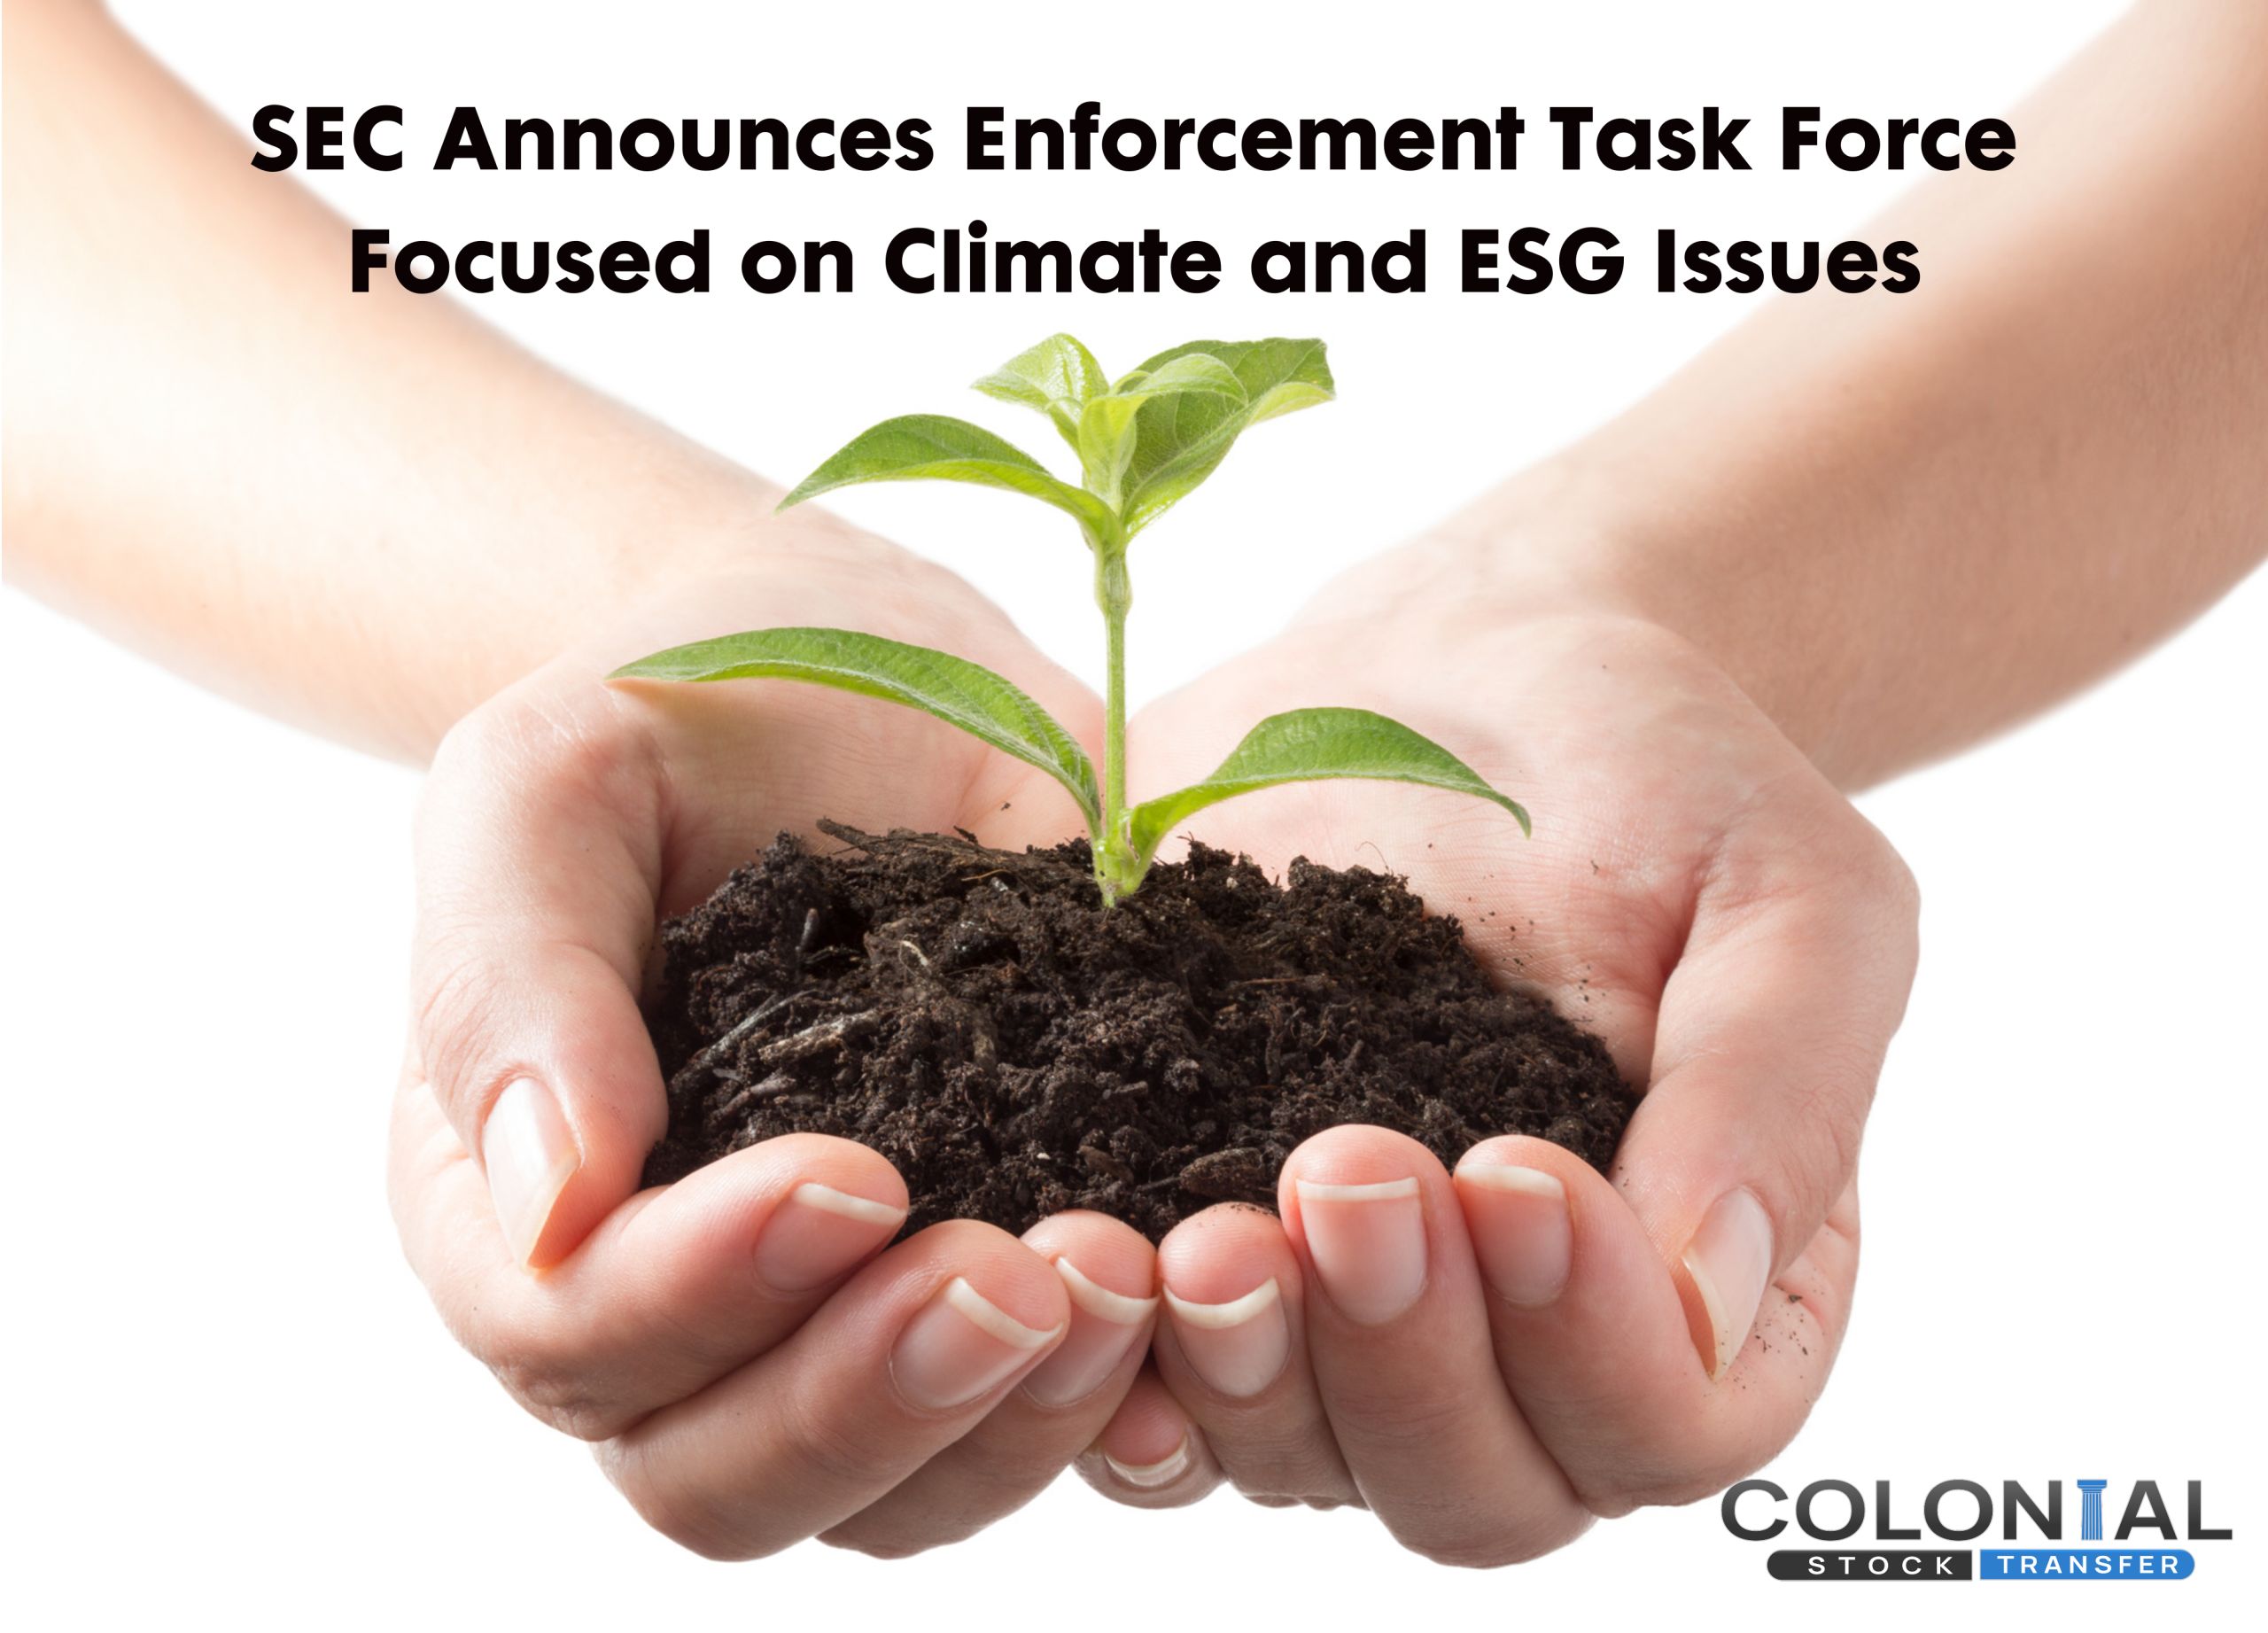 SEC Announces Enforcement Task Force Focused on Climate and ESG Issues